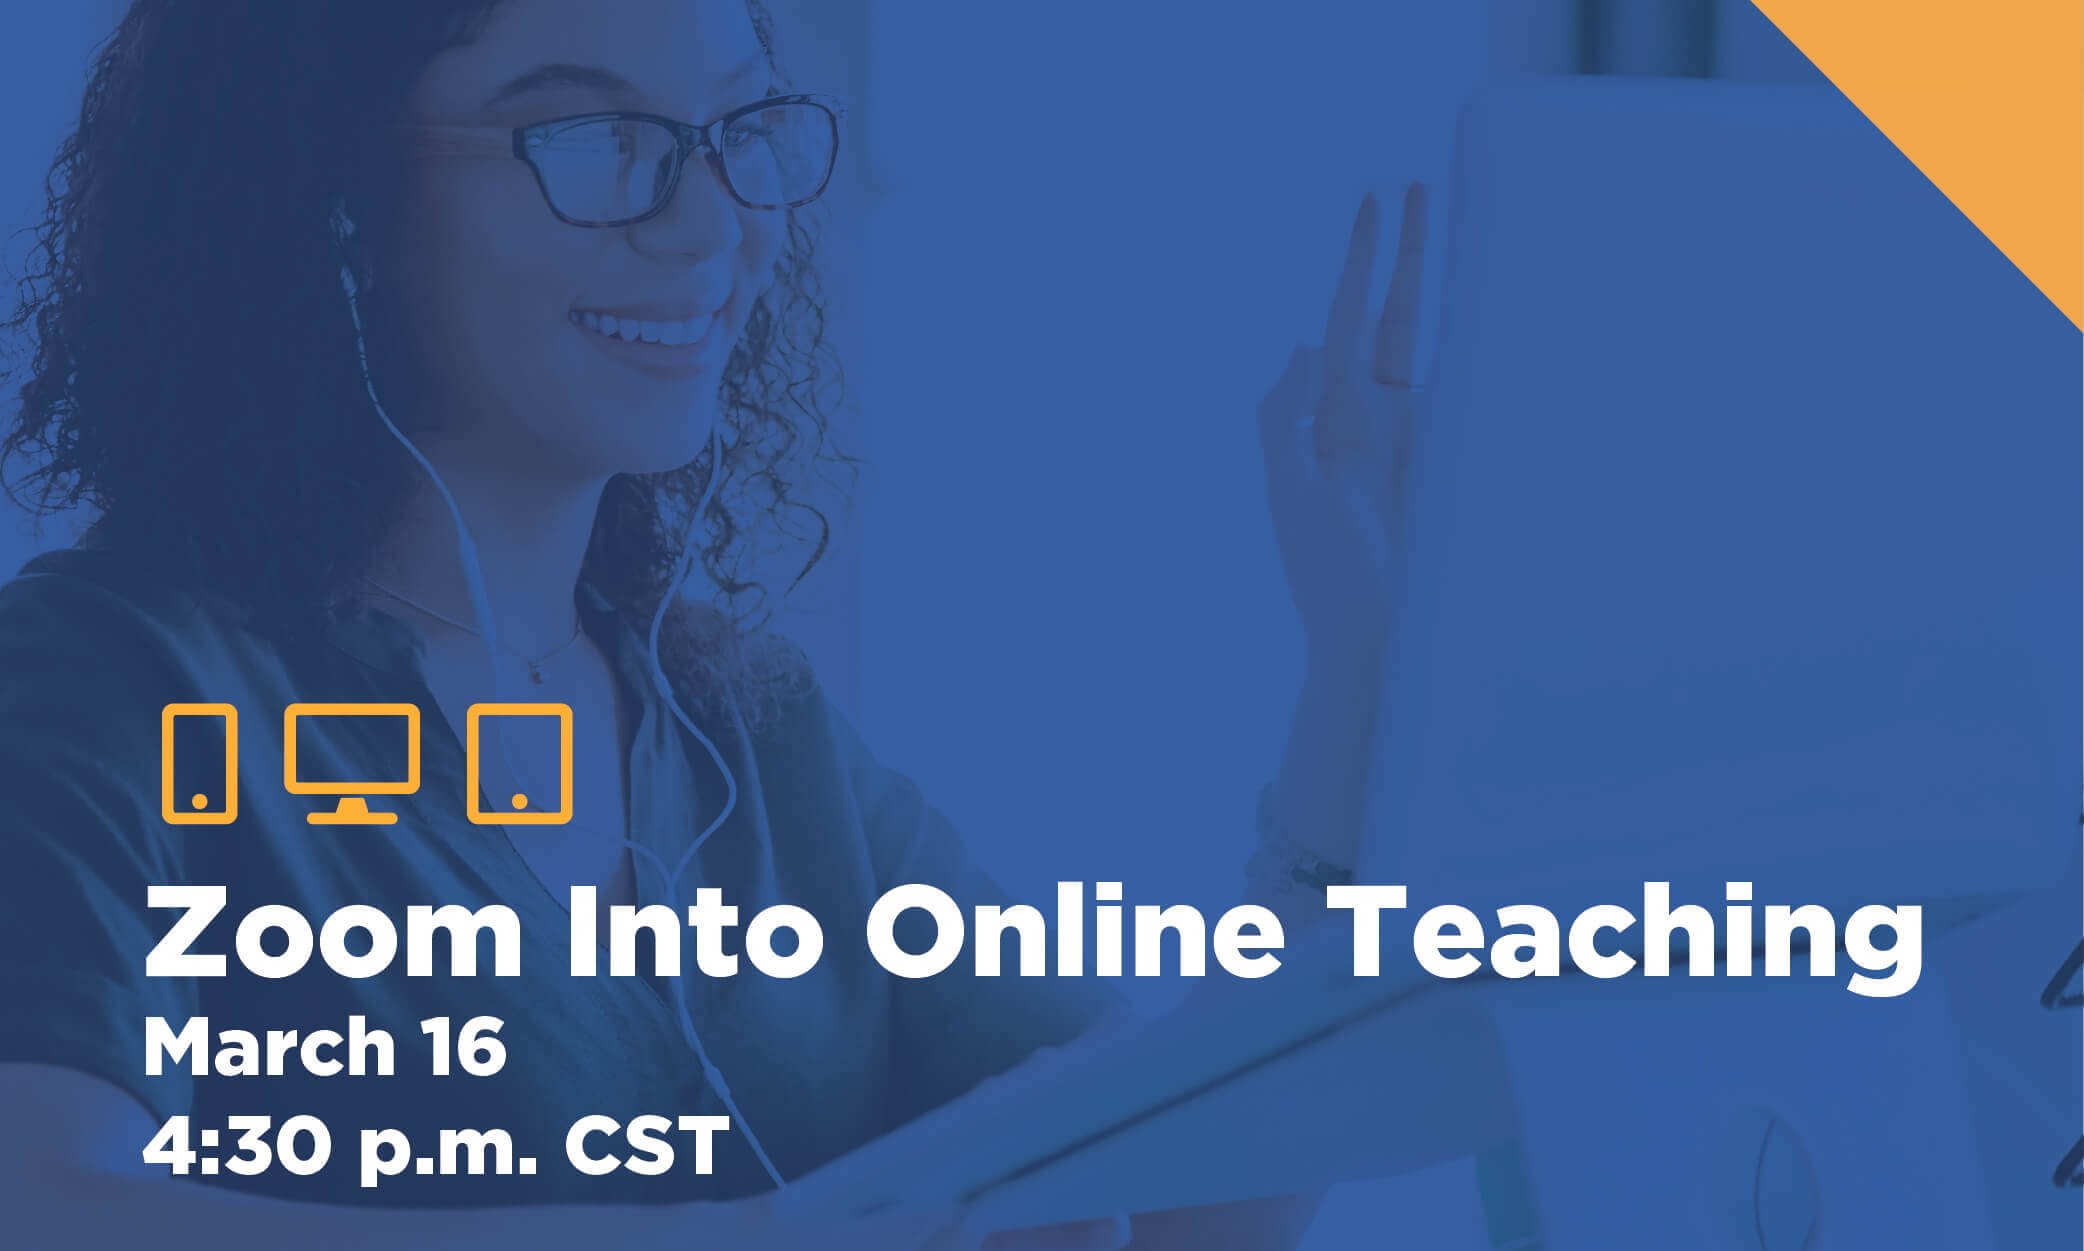 Zoom Into Online Teaching